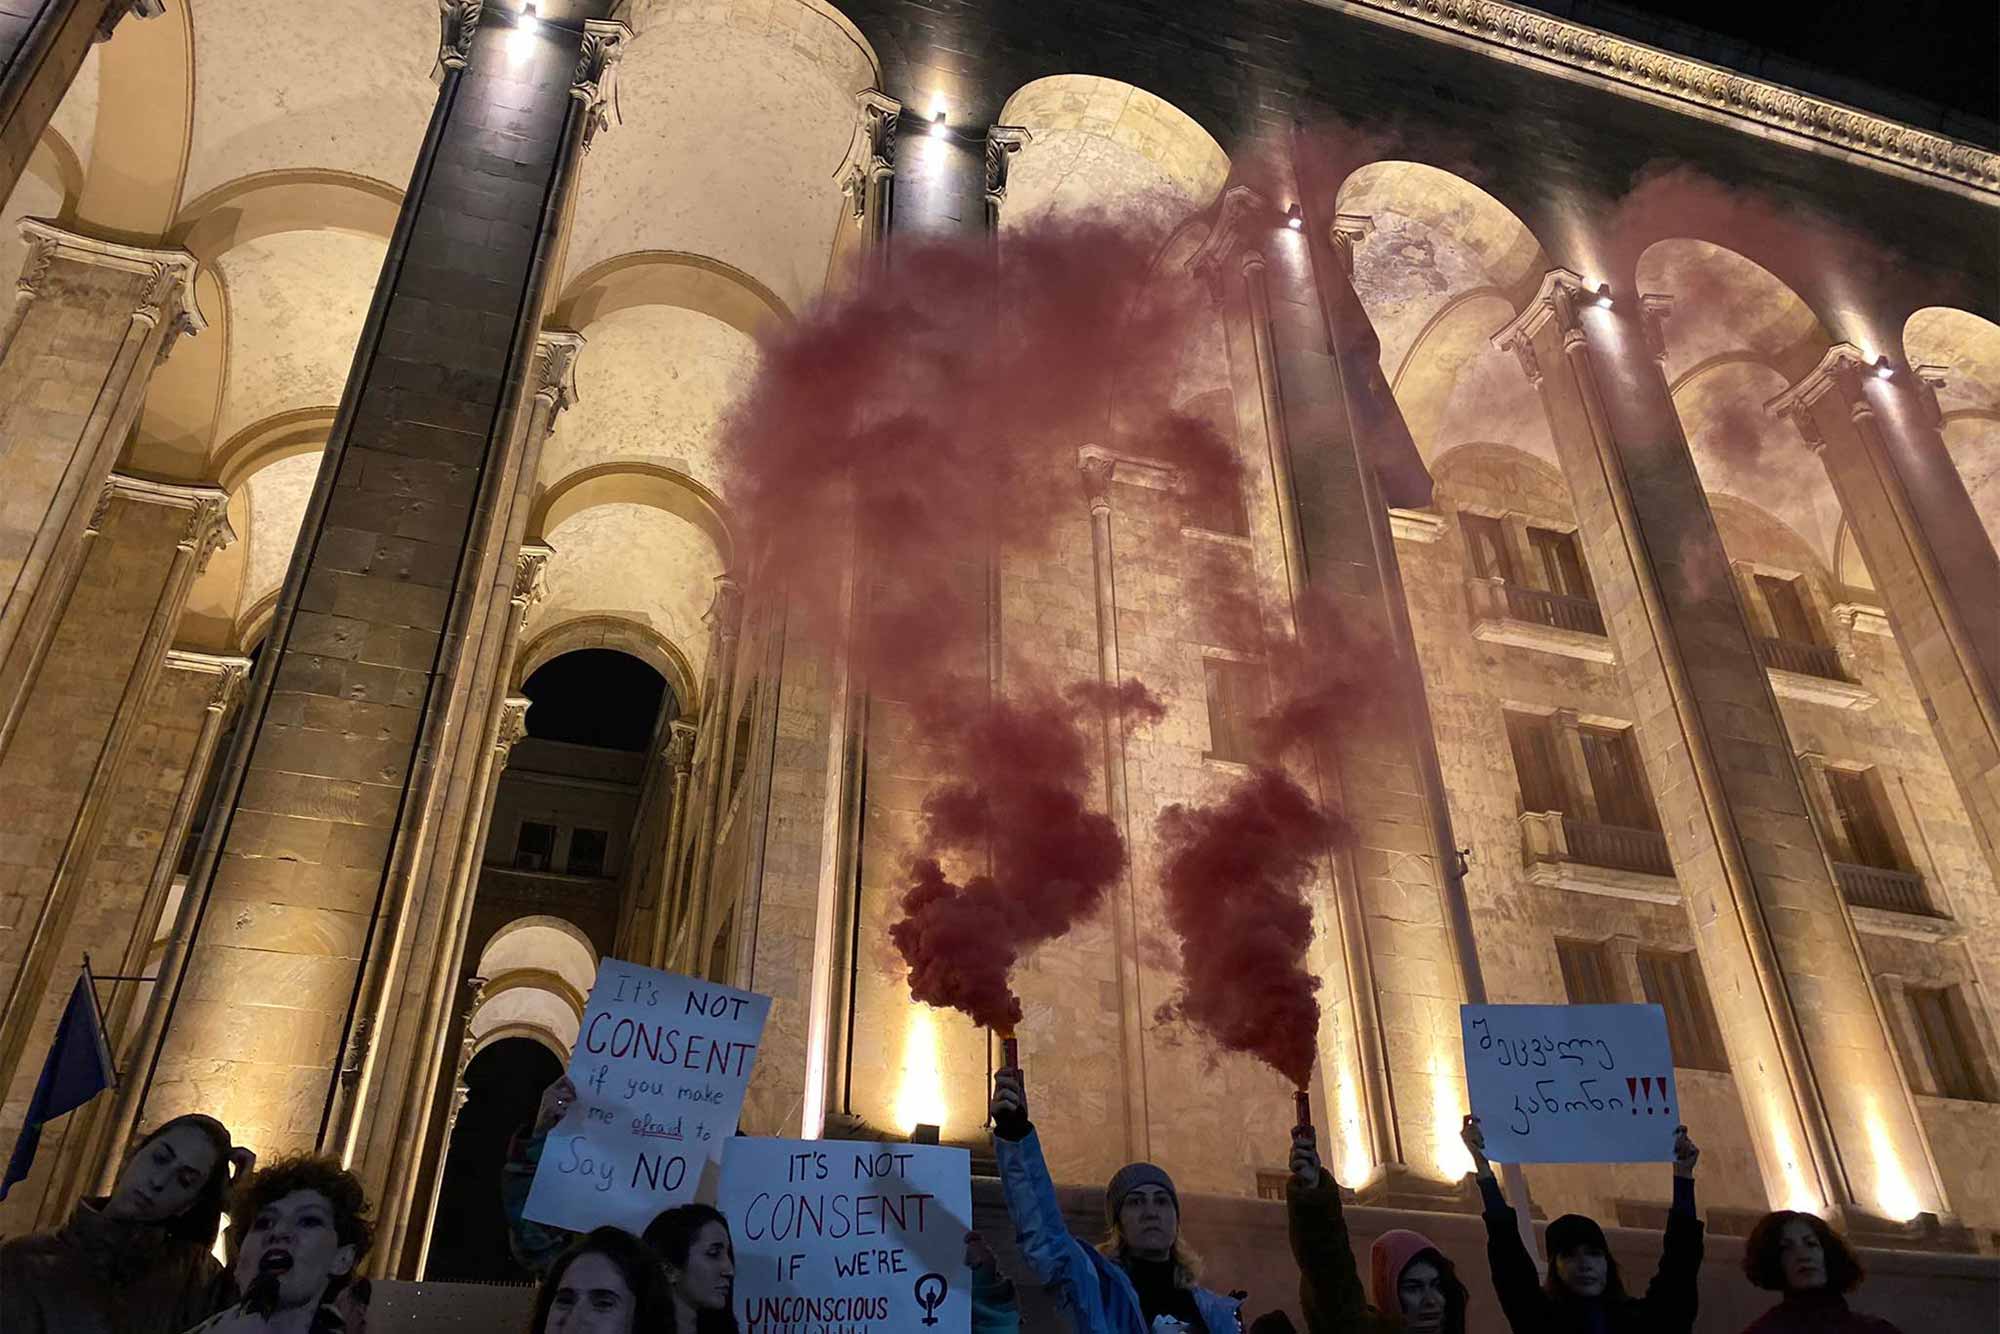 Protesters gathered in front of the Georgian Parliament, in central Tbilisi, on November 25 calling for more actions against gender-based violence. On the same day, a man in western Georgia murdered his ex-wife and injured several others after pouring petrol over her and setting her on fire. © Gvantsa Seturidze/IWPR